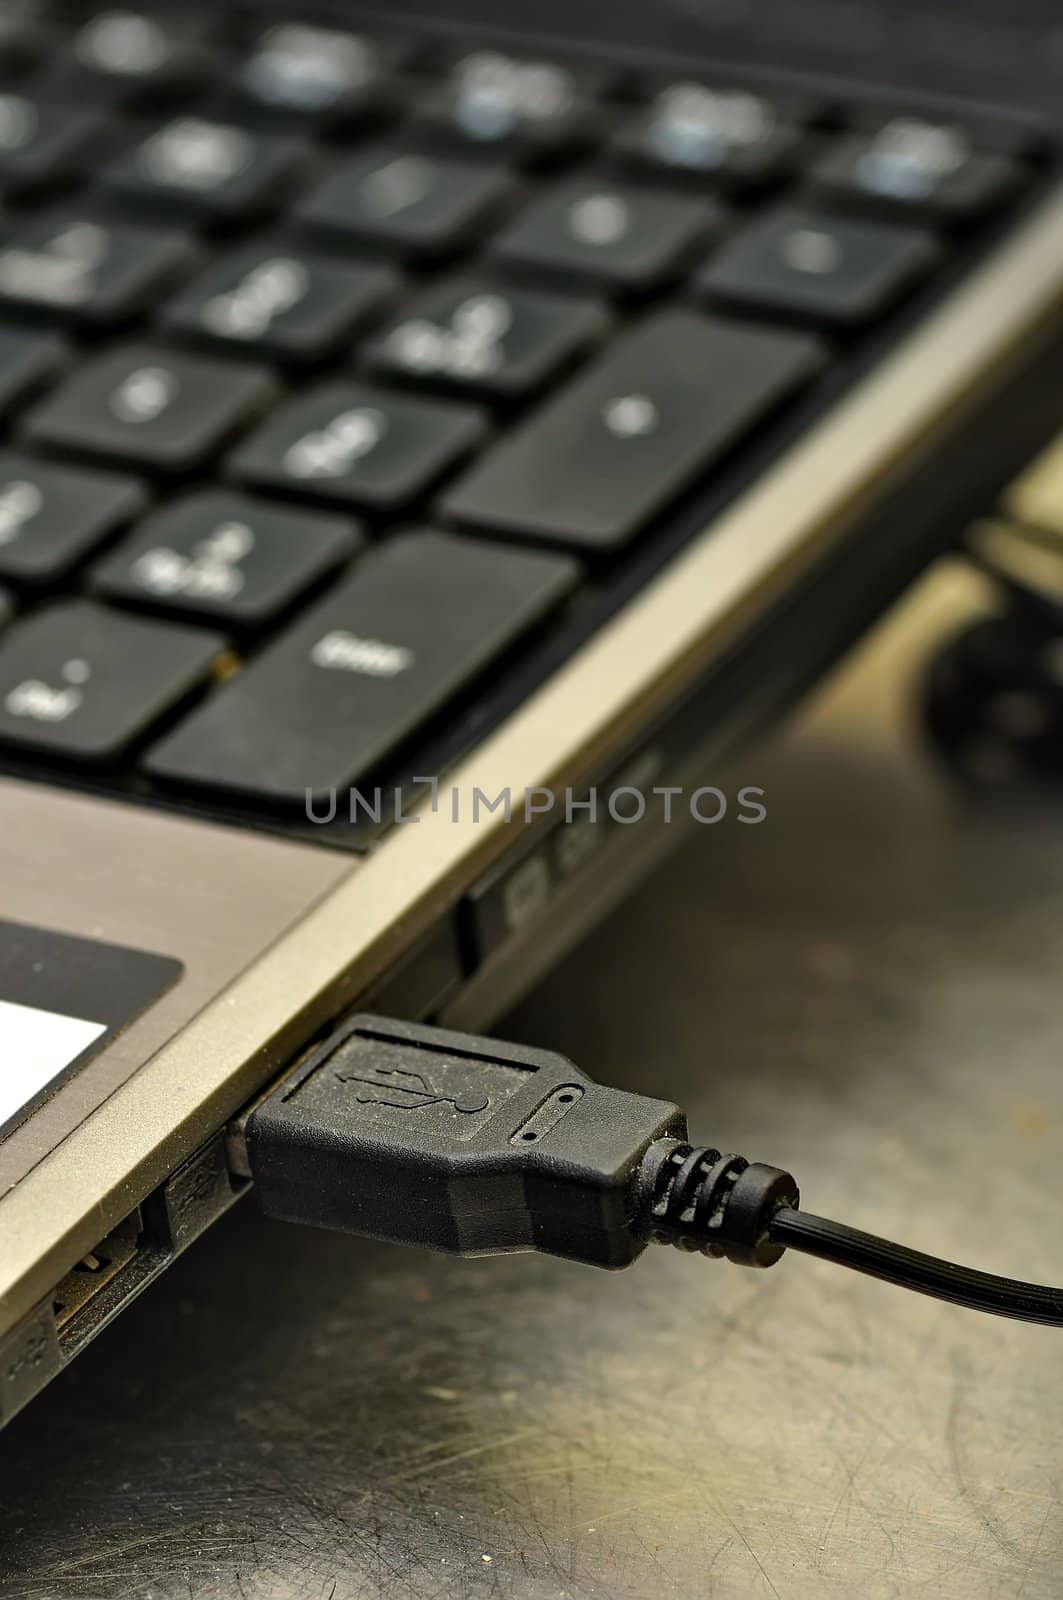 Plug the USB jump drive to a laptop